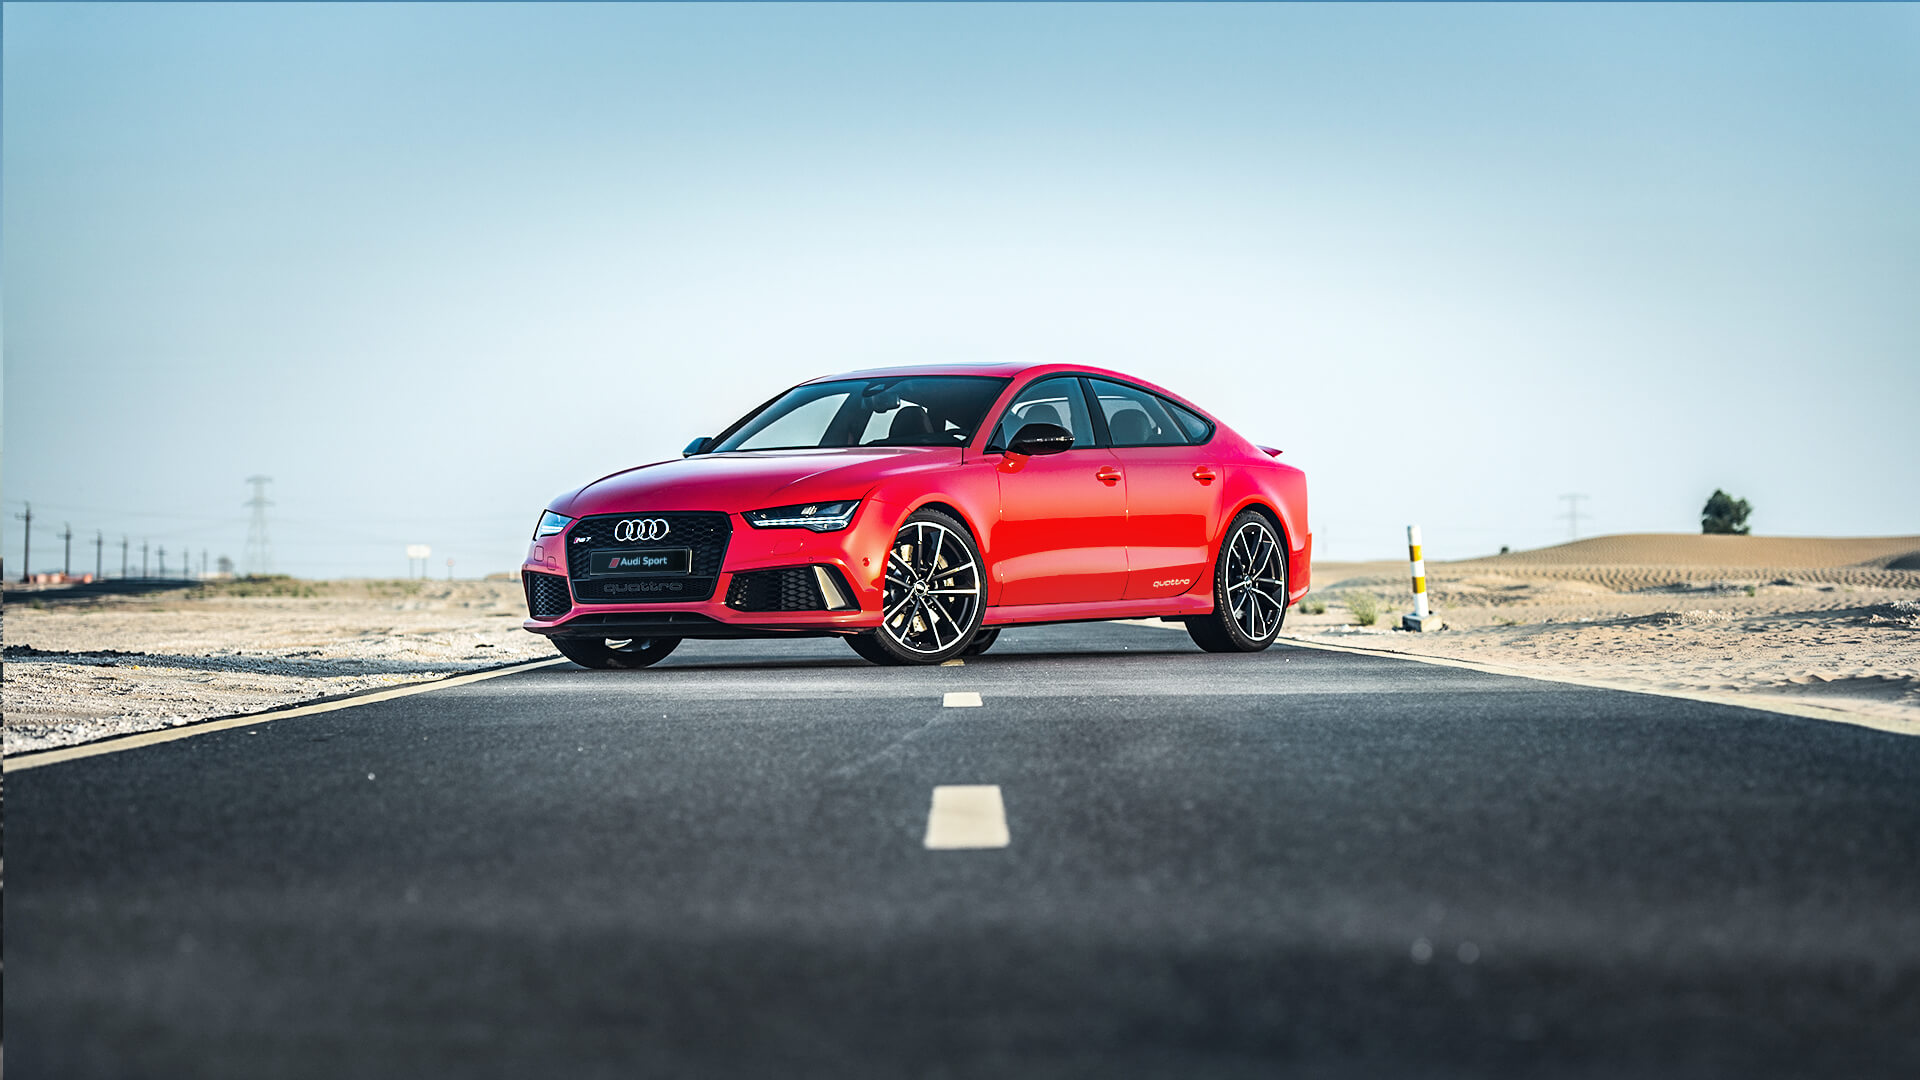 Exterior Design of the 2018 Audi RS 7